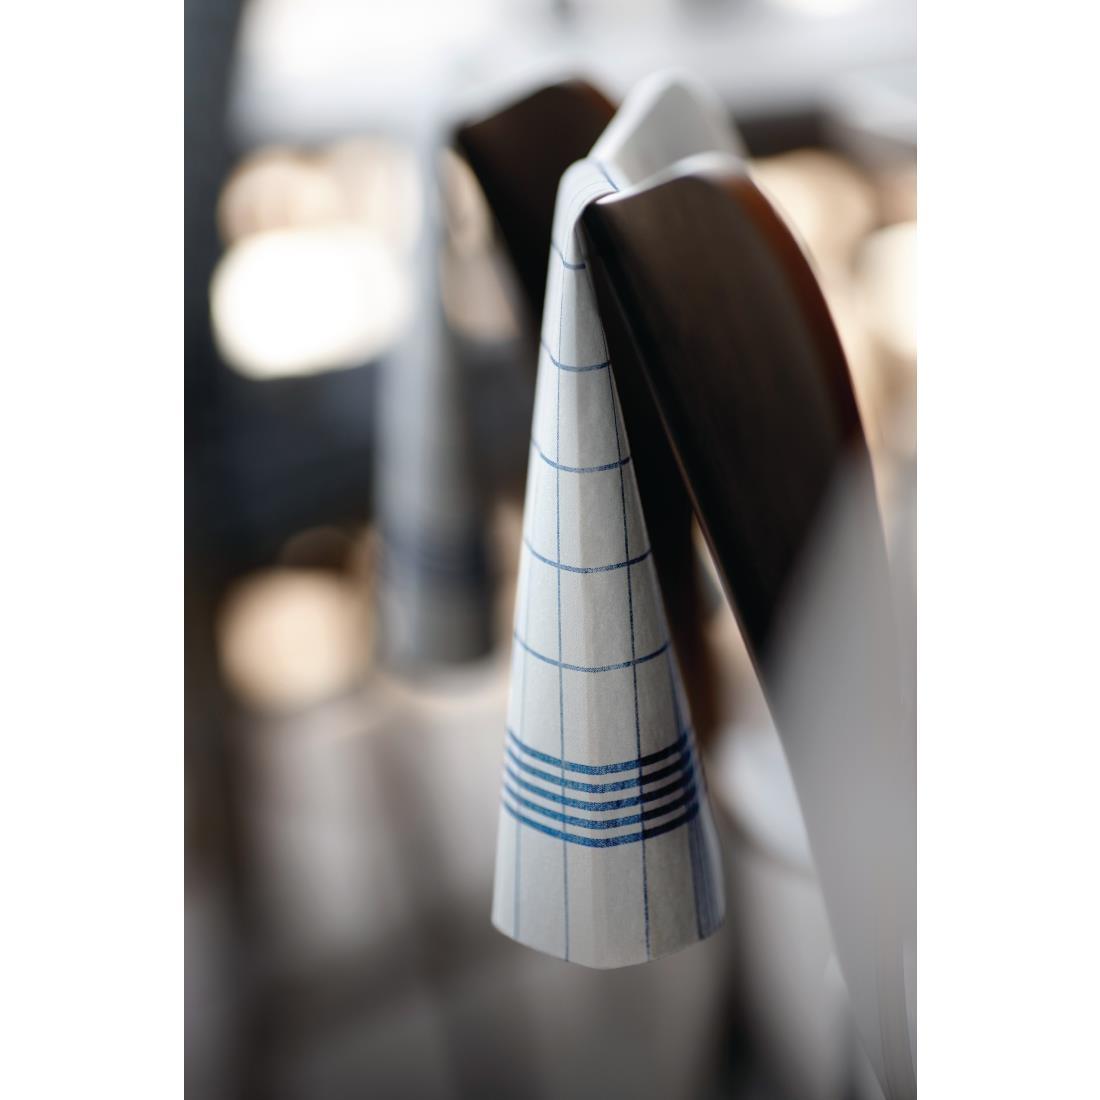 Dunisoft Towel Napkin Blue Check 38x54cm (Pack of 250) - CY523  - 5